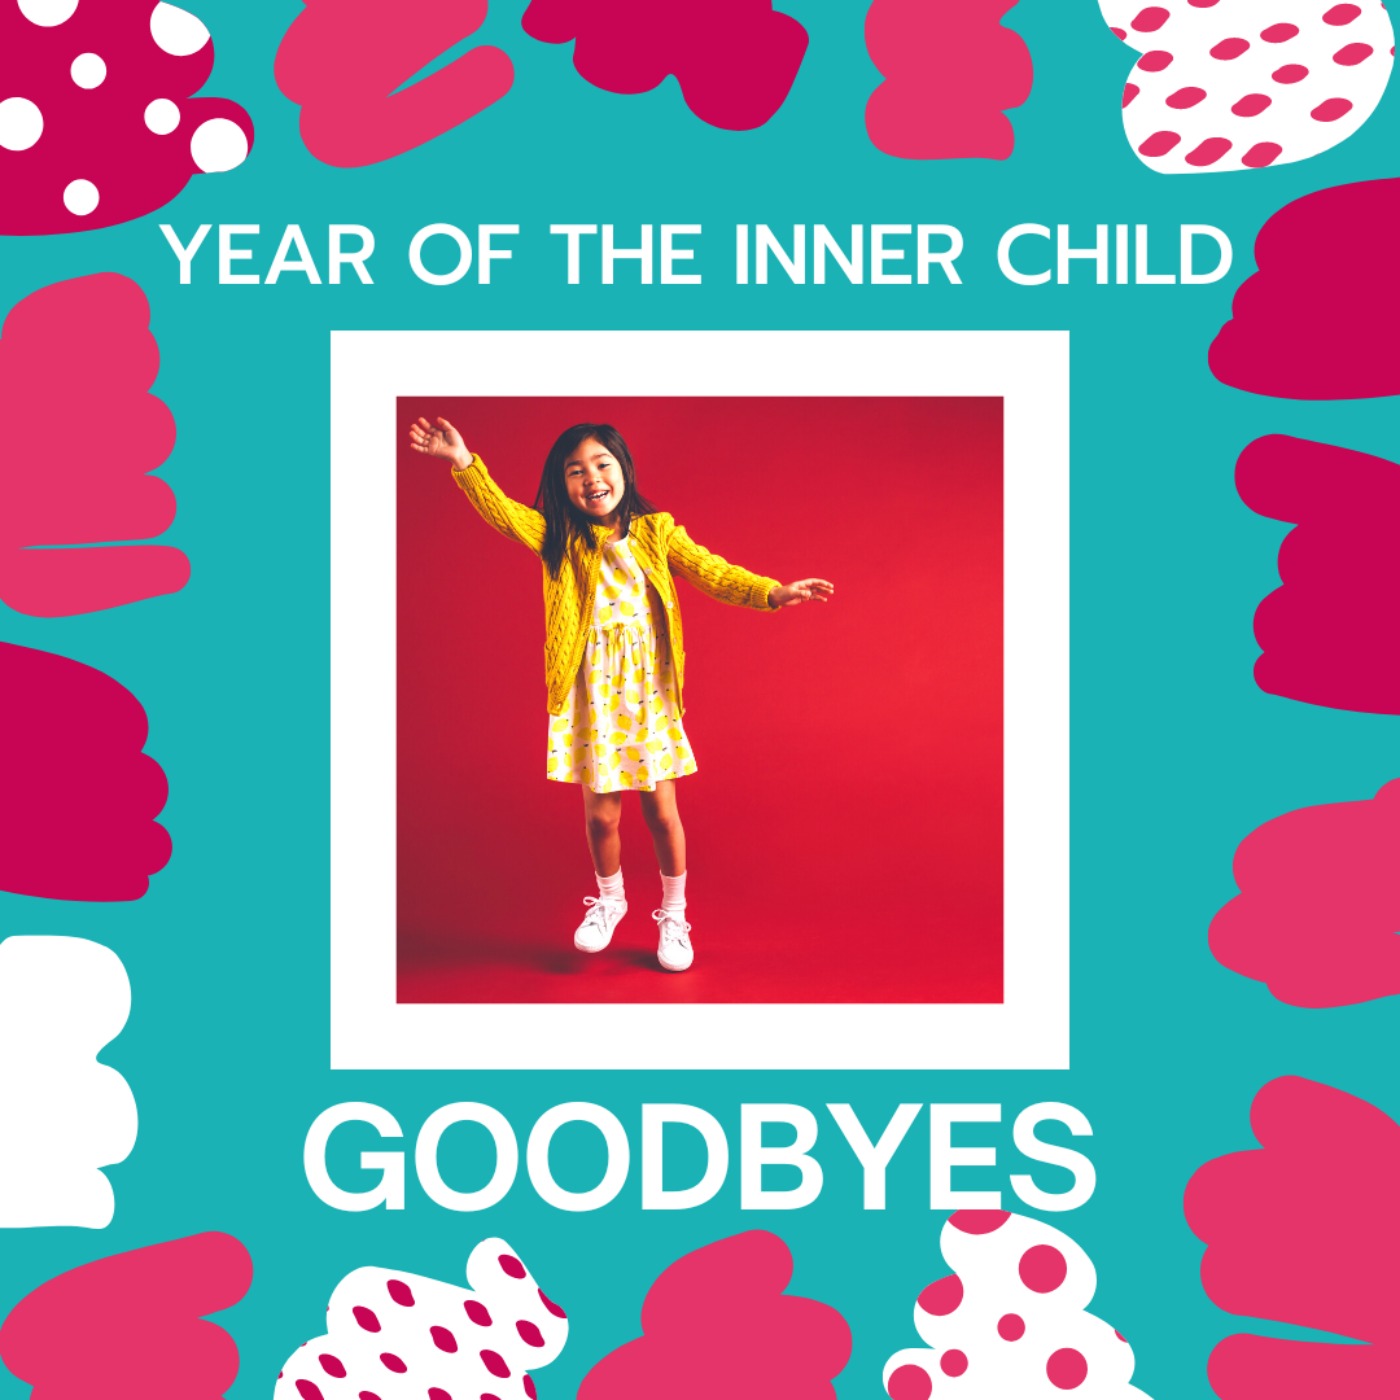 Year of the Inner Child: Goodbyes